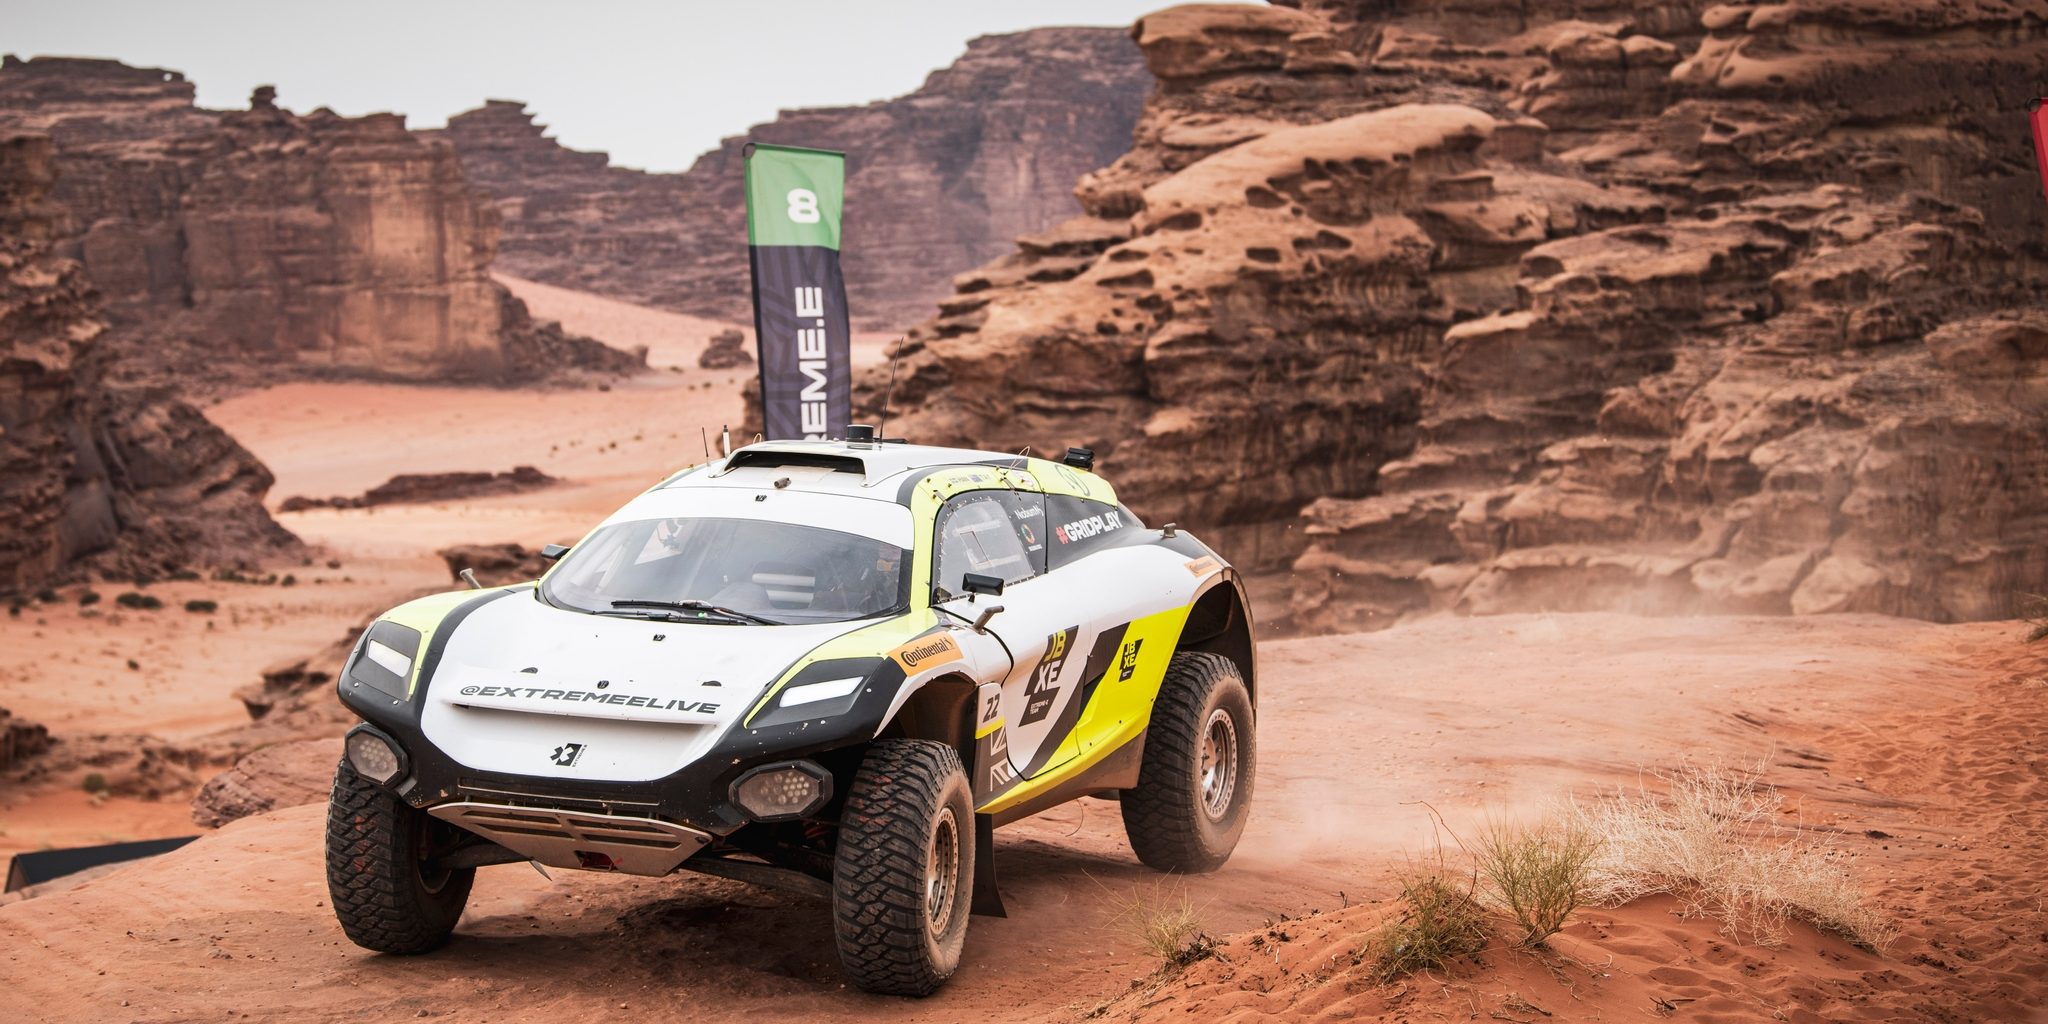 Extreme E starts season 2 of electric off-road racing at the Desert X Prix this weekend Electrek